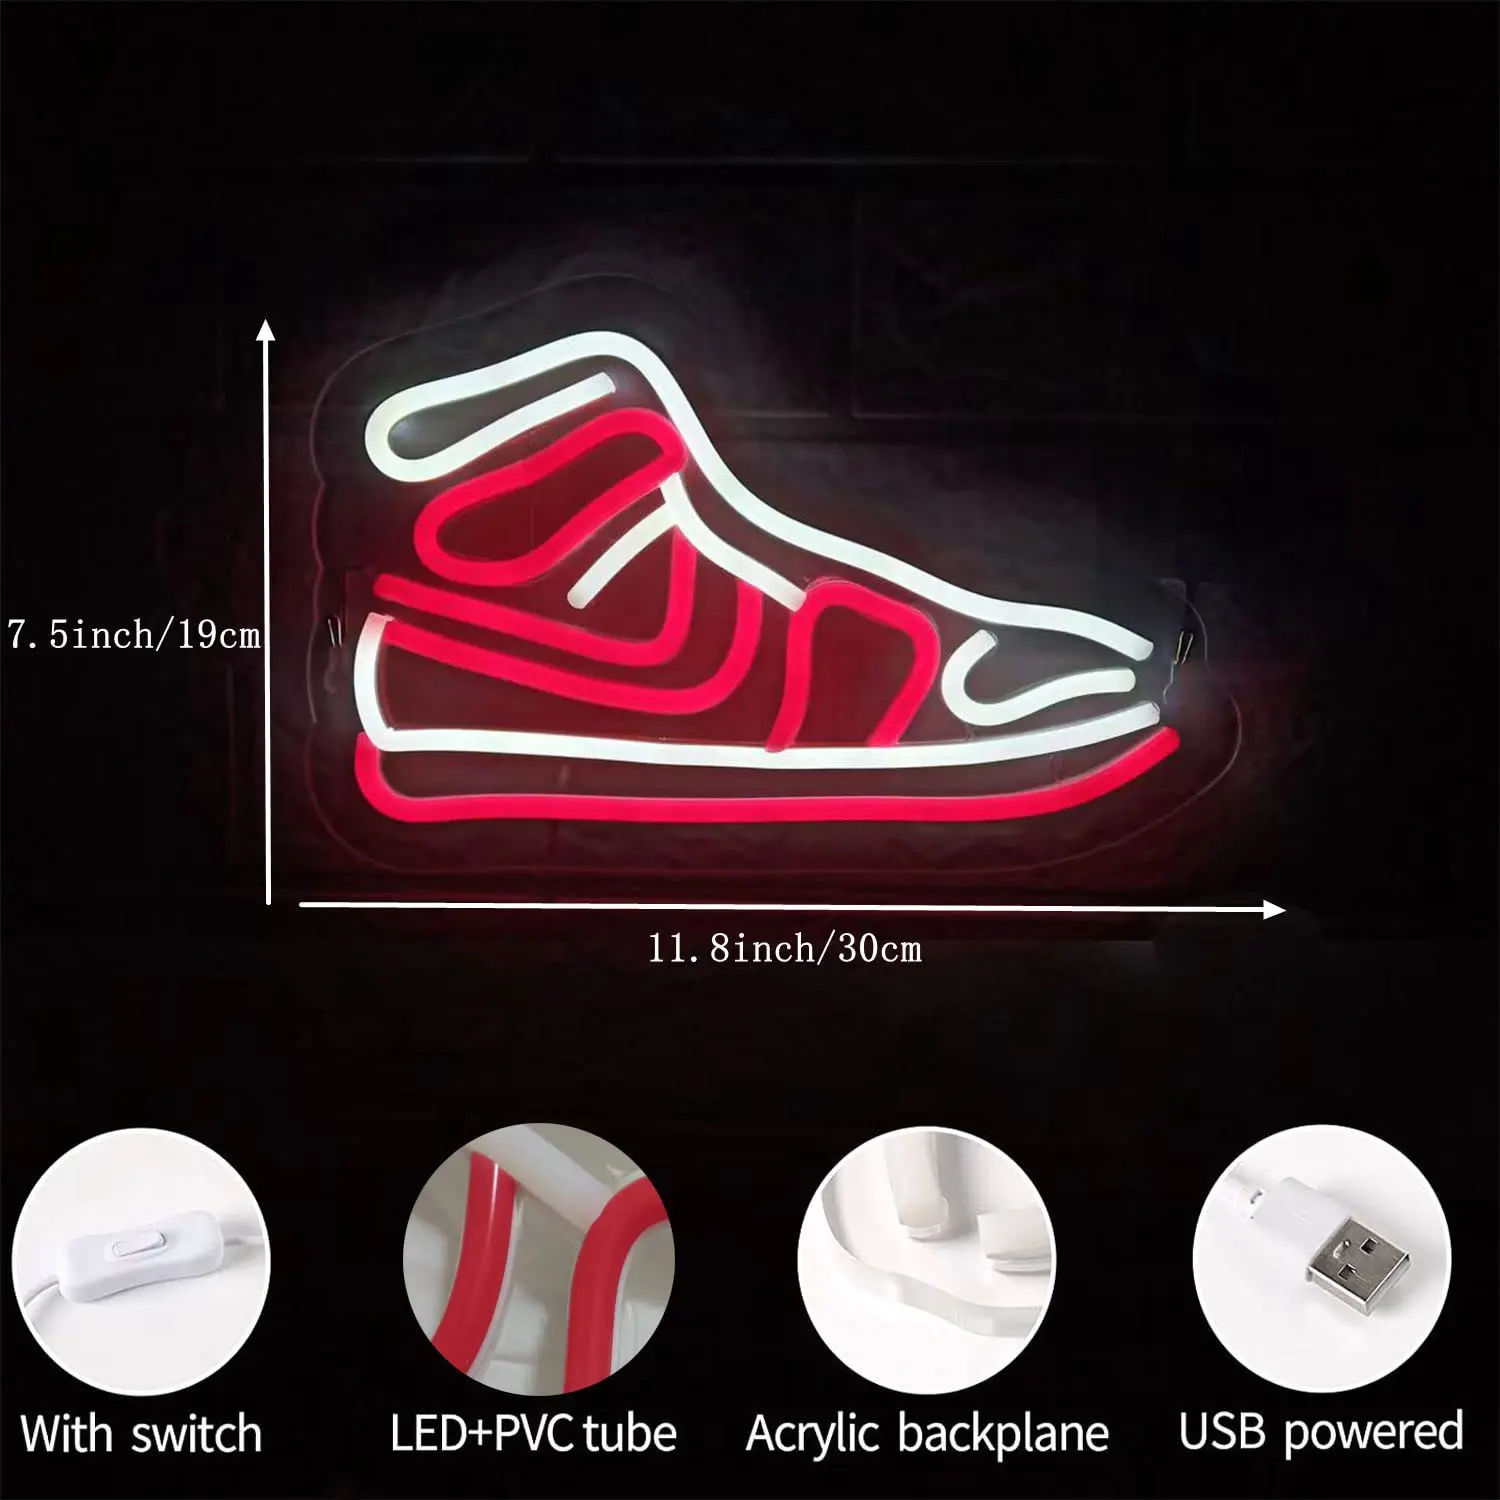 Magnetic Shoe Storage Box Drop Side Sneaker Container XL LED Light Sound  Control | eBay